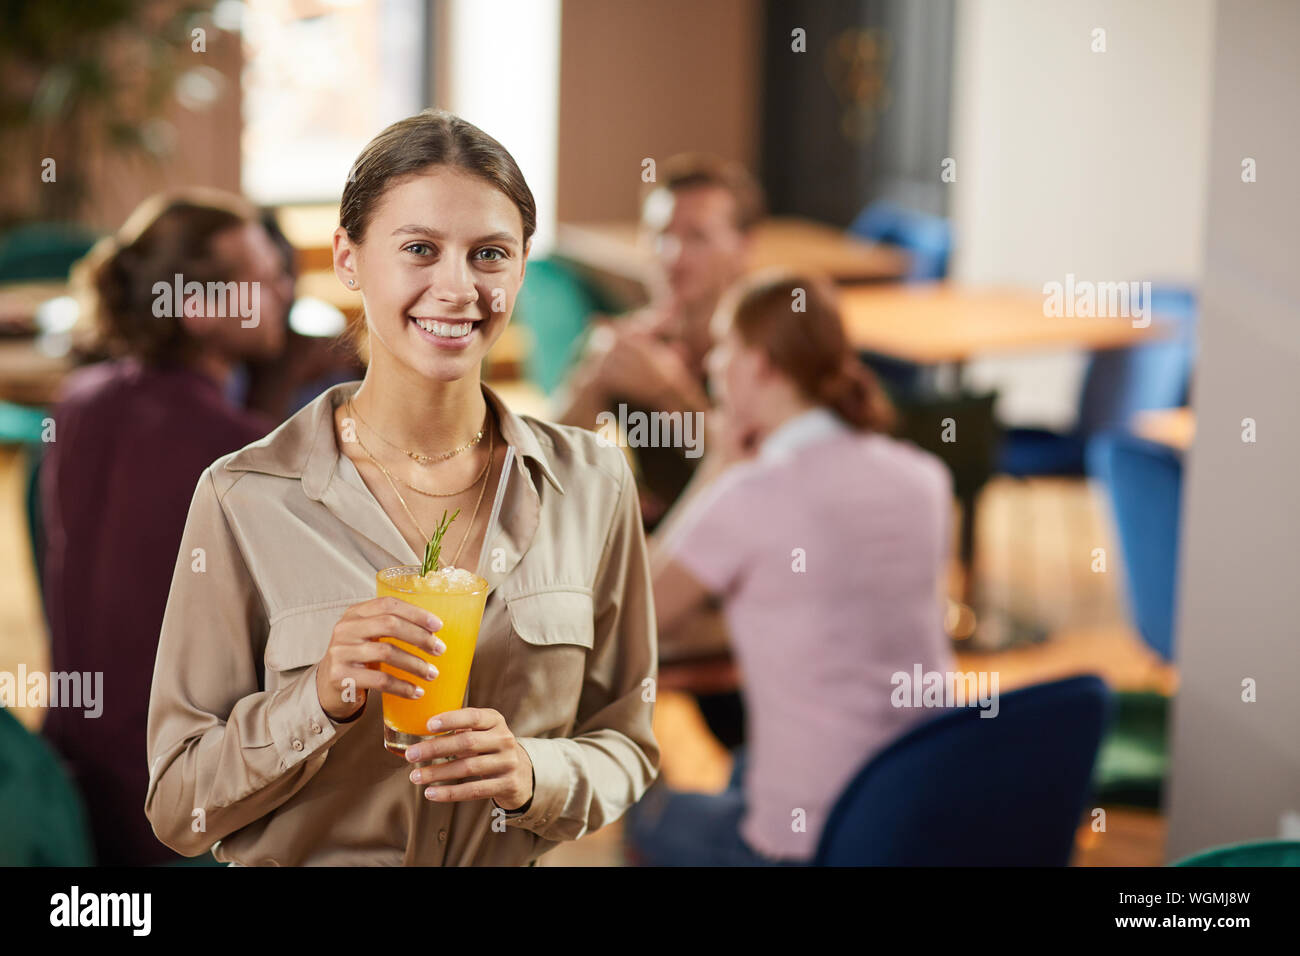 Waist up portrait of cheerful young woman looking at camera while holding refreshing drink in cafe, copy space Stock Photo